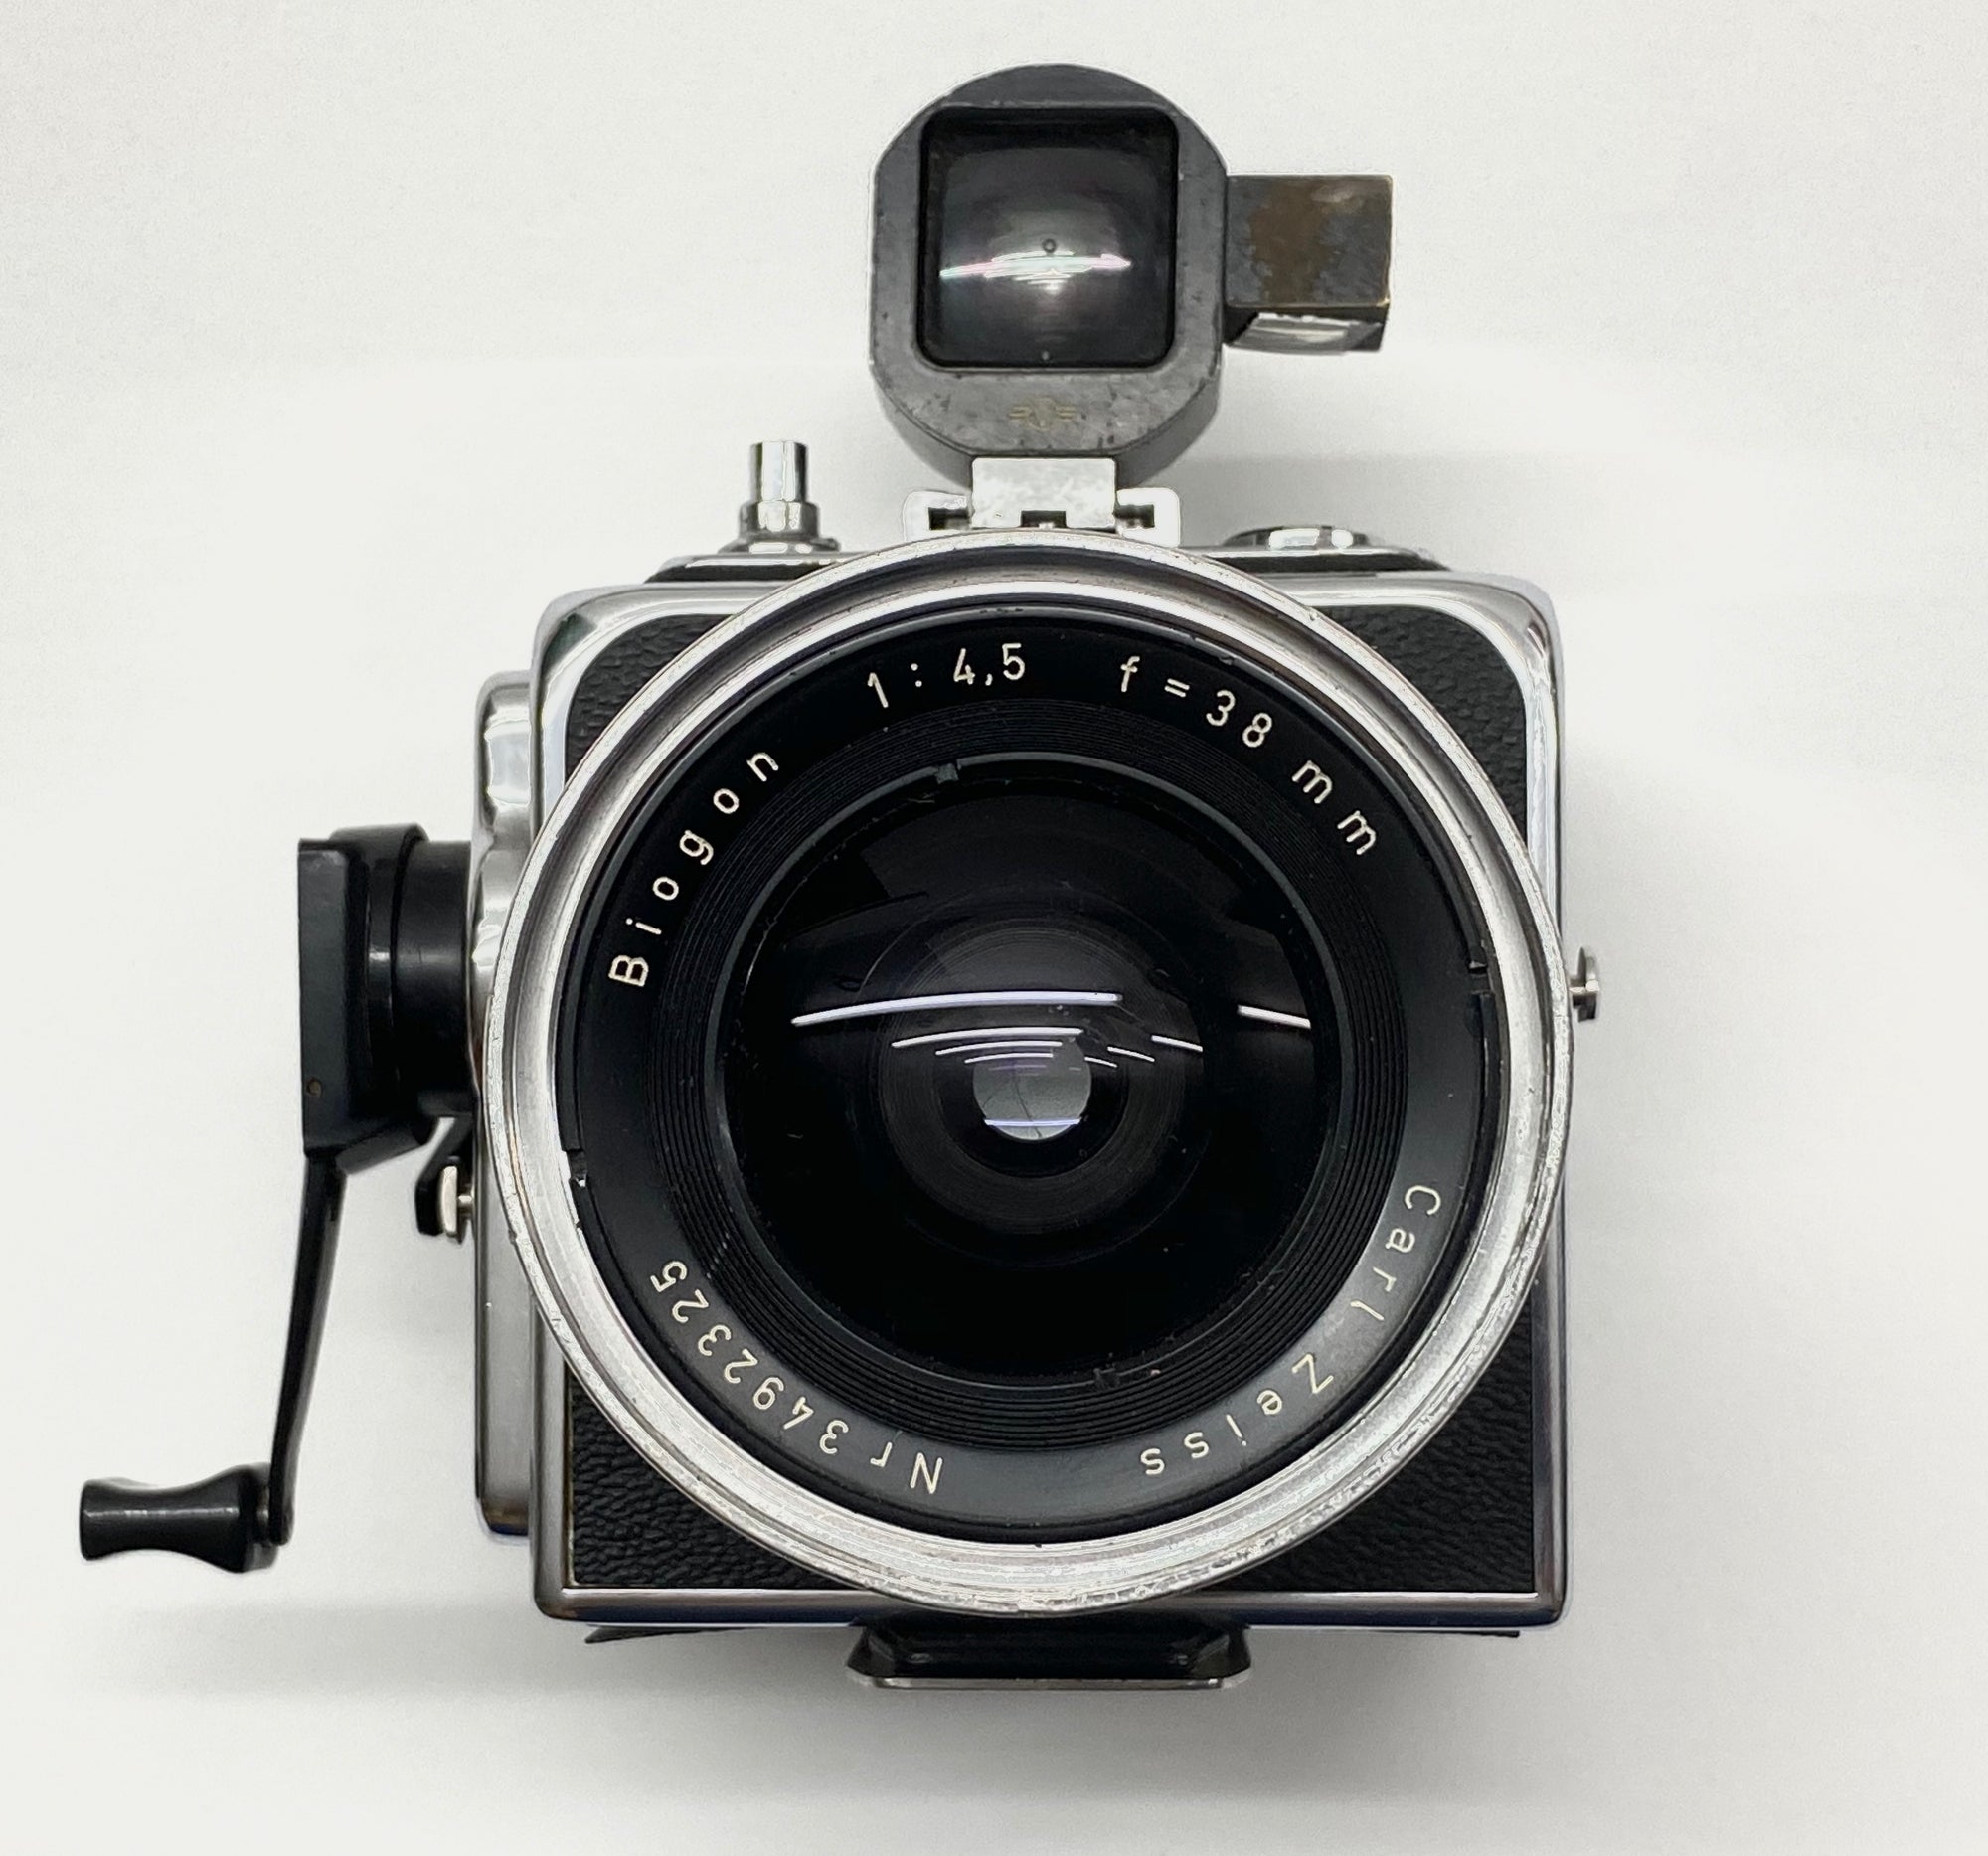 Hassleblad Superwide Camera owned by Richard Heeps